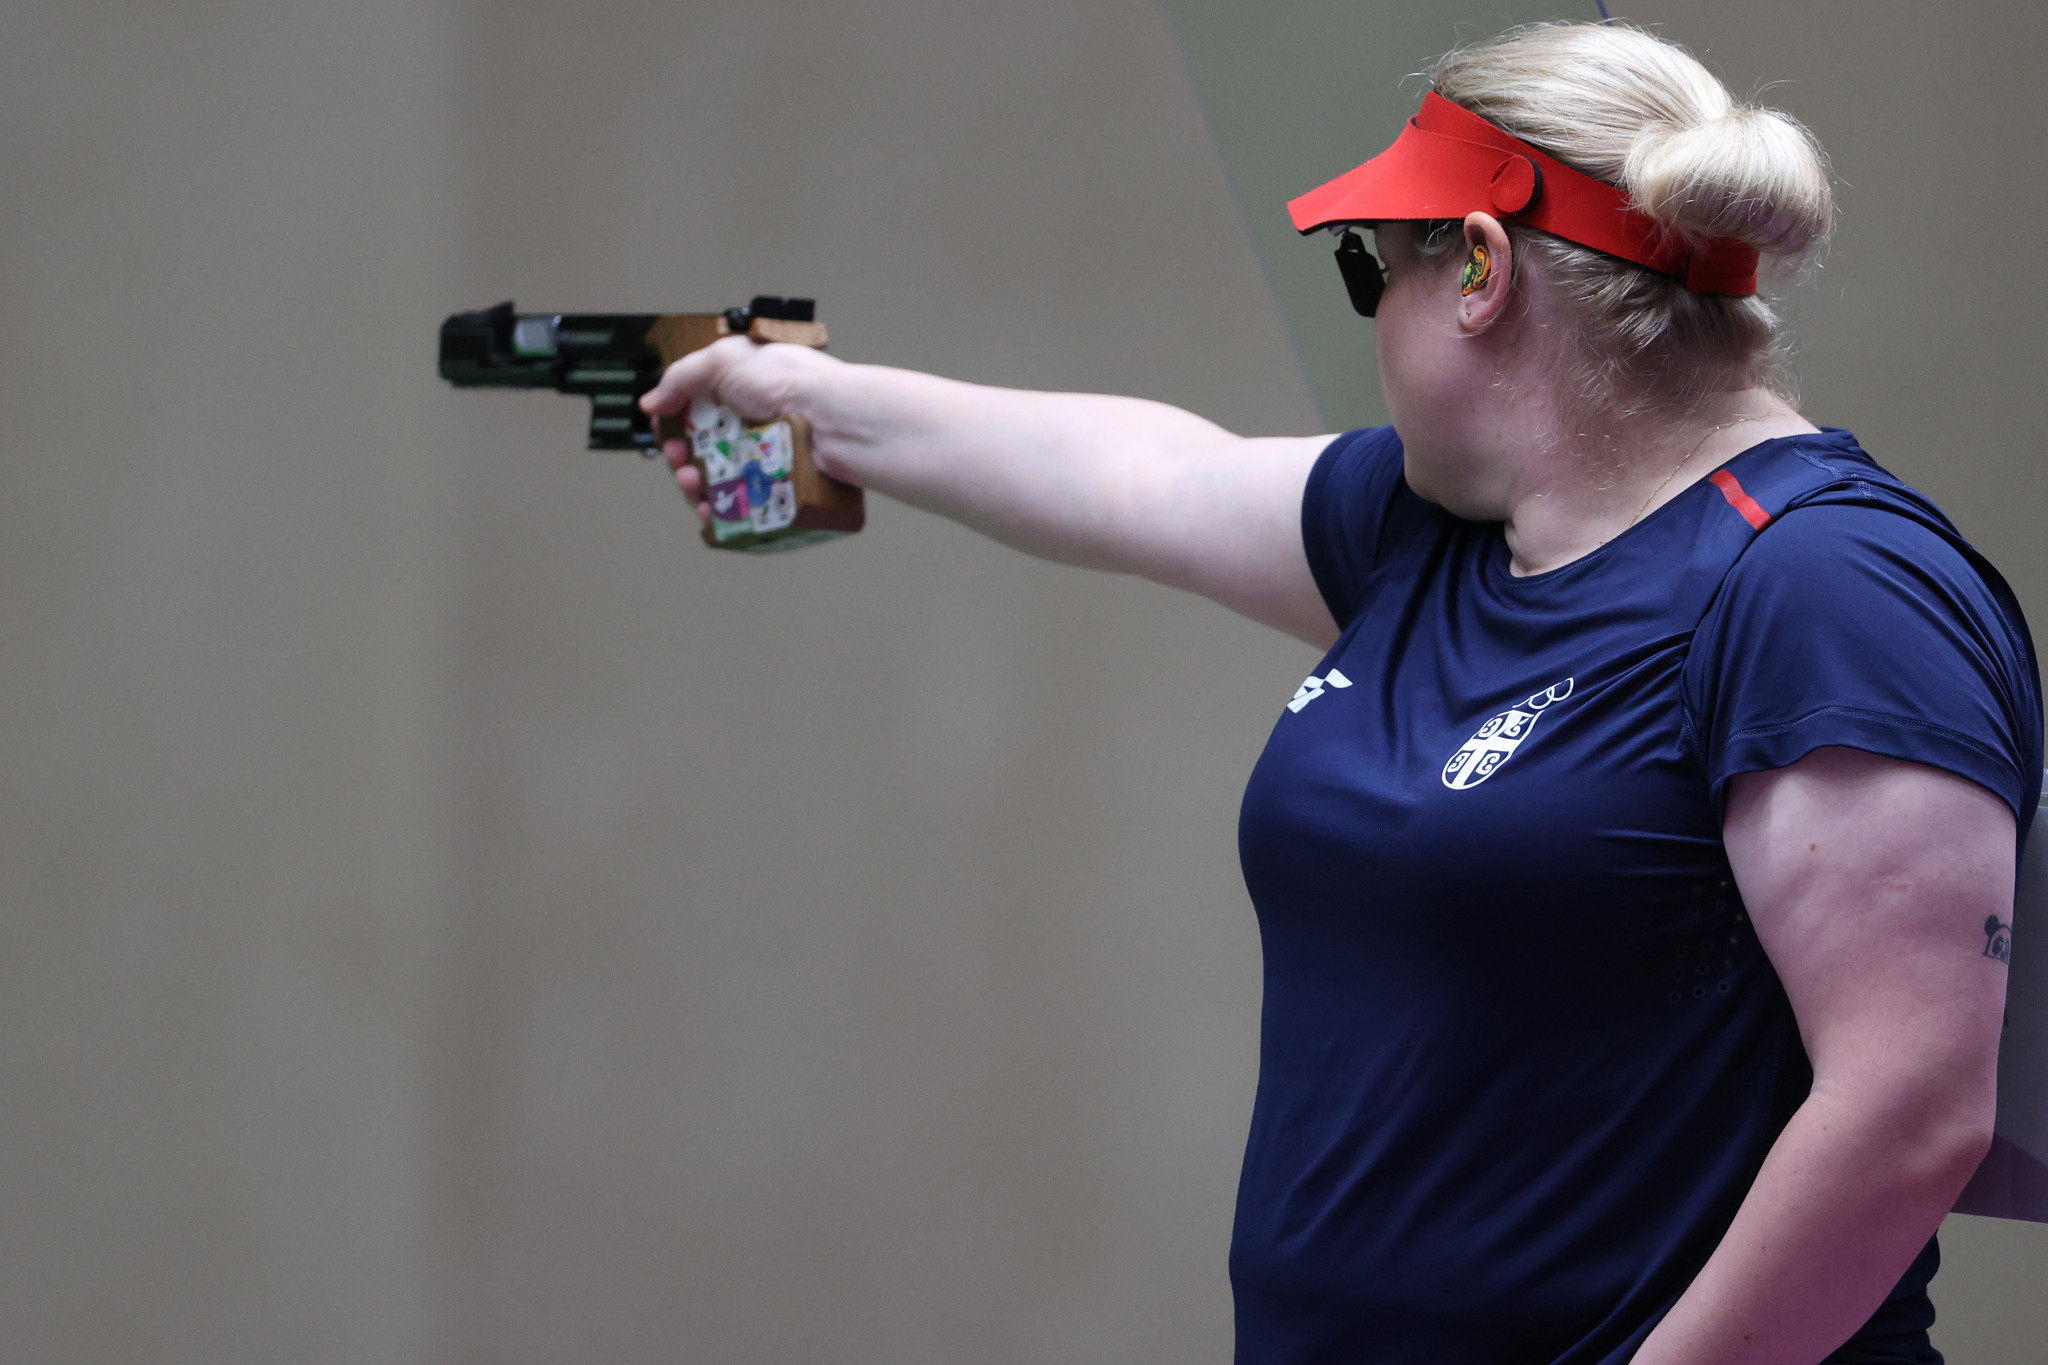 Serbia's Zorana Arunović claimed victory in the women's 10m air pistol final in Changwon ©Getty Images